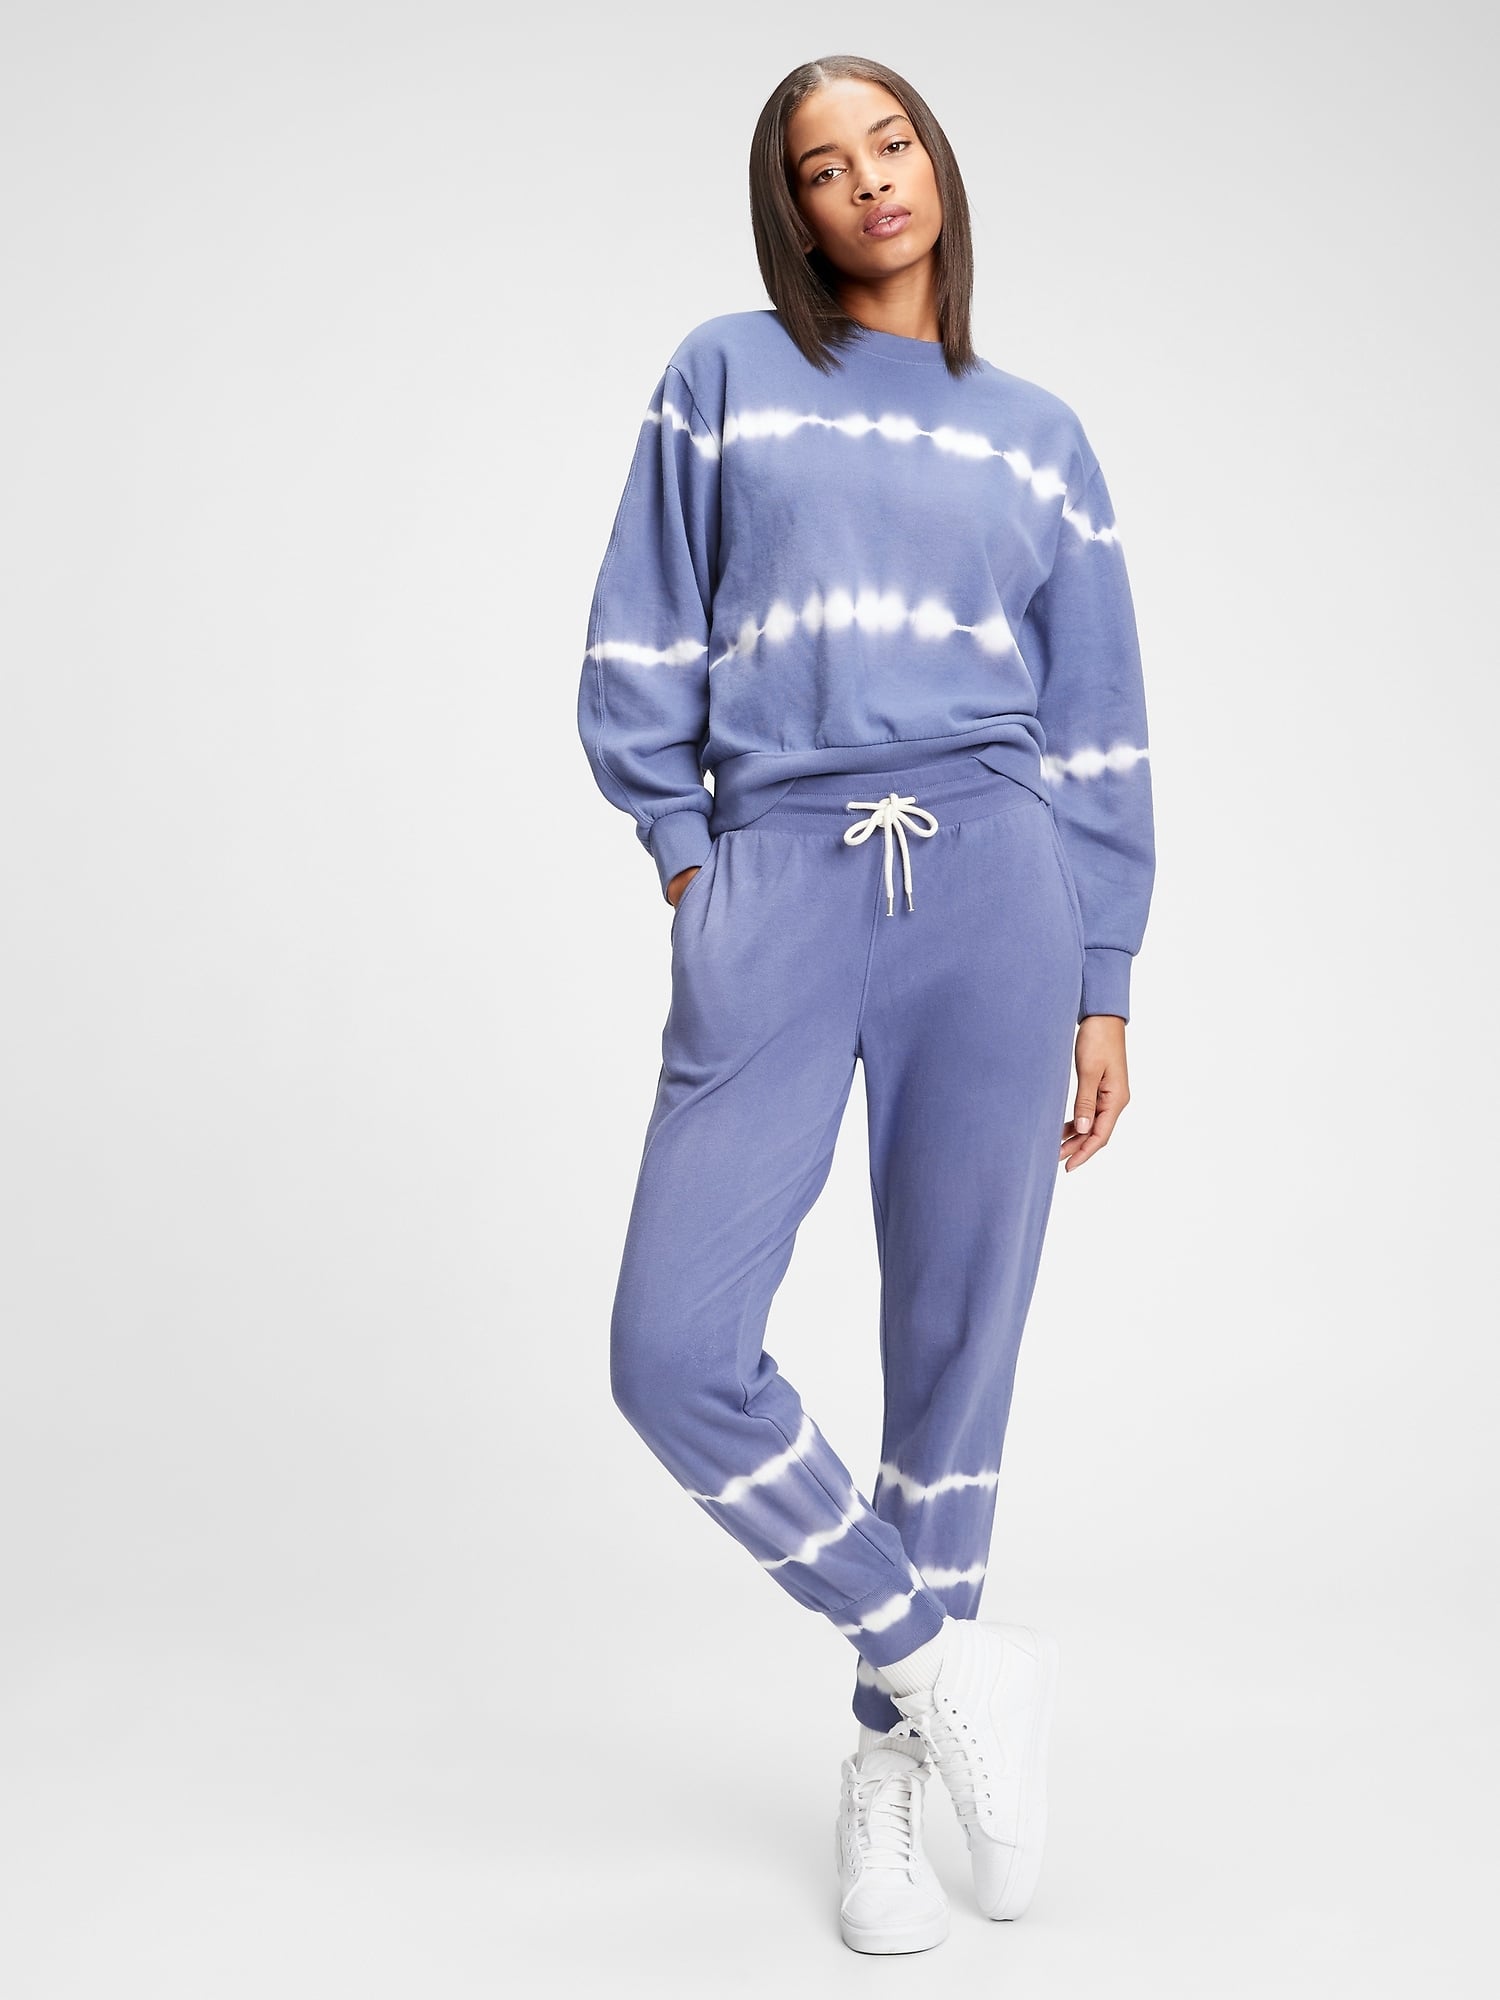 Vedligeholdelse abstraktion udendørs Gap Vintage Soft Ribbed Cuff Joggers and Balloon Sleeve Crewneck Sweatshirt  | Gap Has the Matching Sweatsuits You're Going to Want to Live in All  Winter Long | POPSUGAR Fashion Photo 5